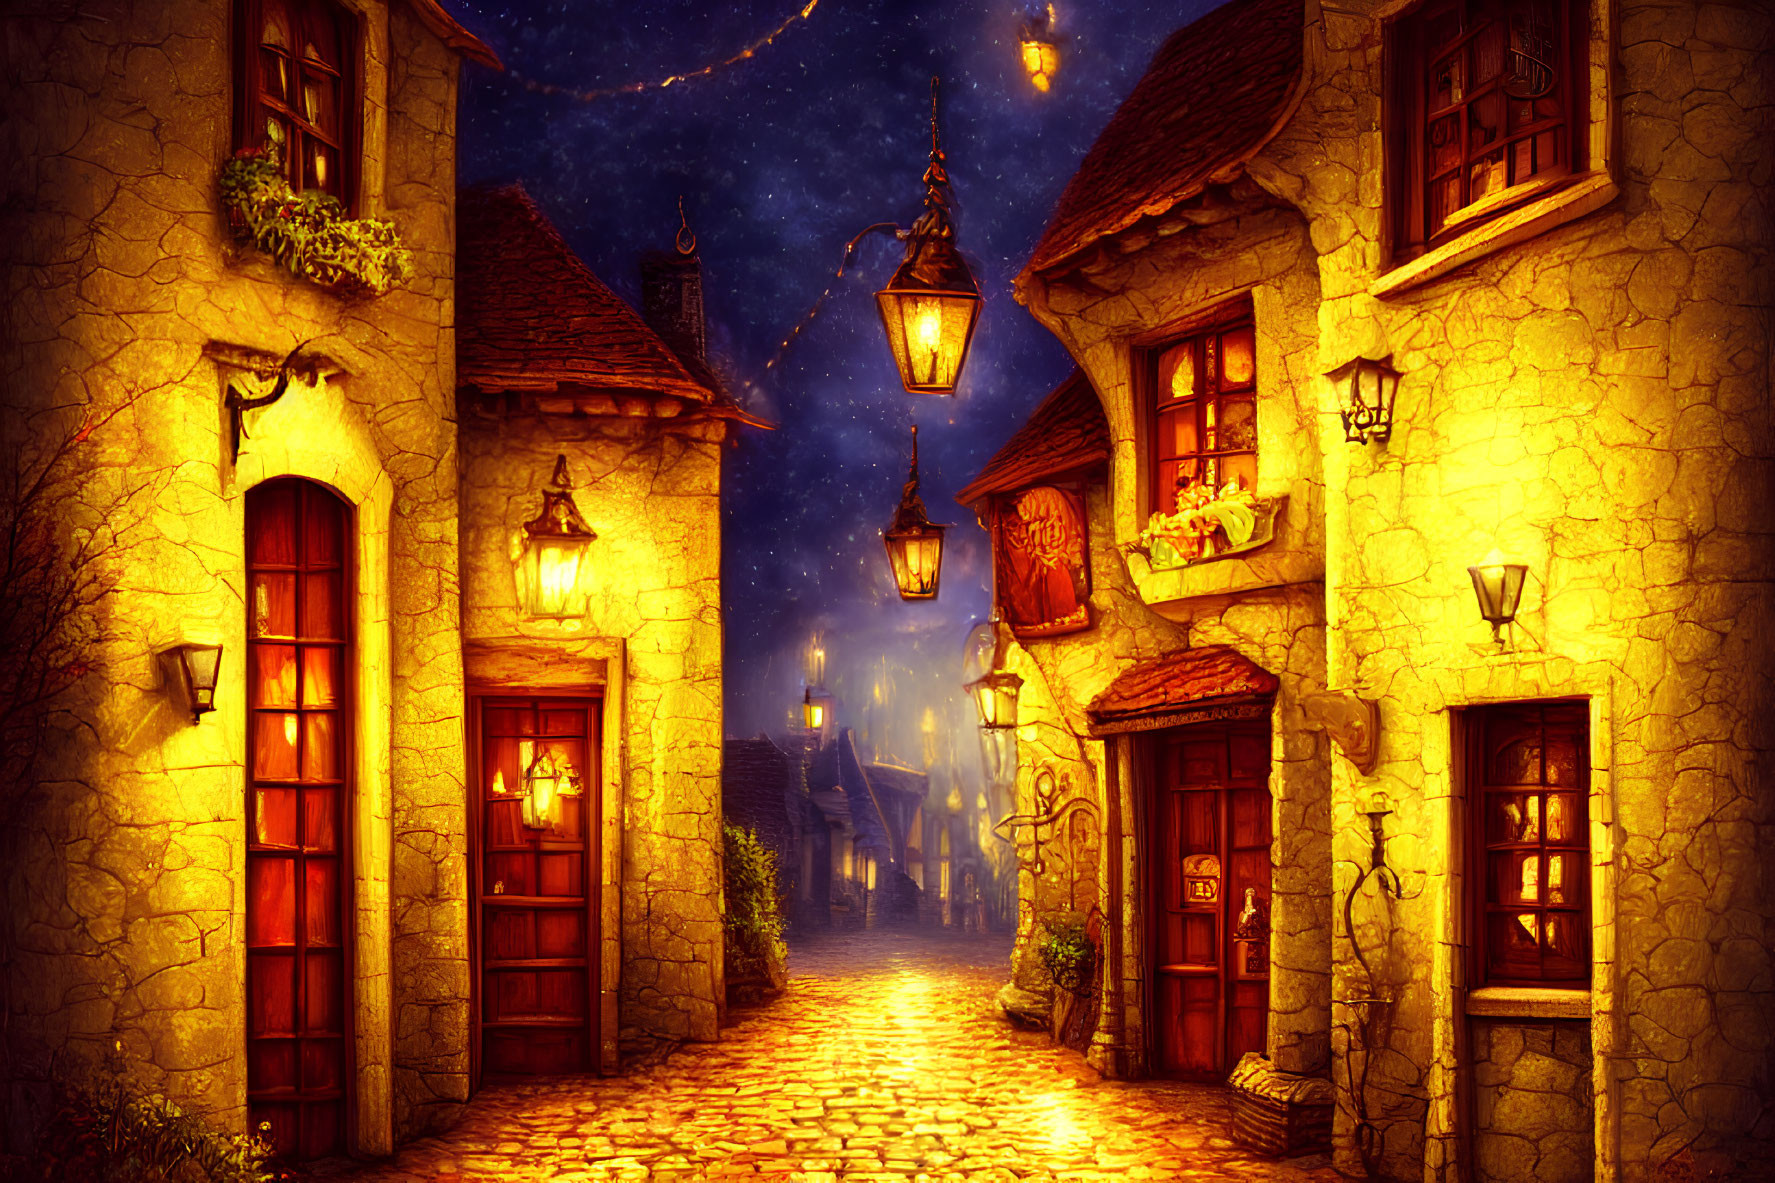 Charming cobblestone street at night with warm street lamps